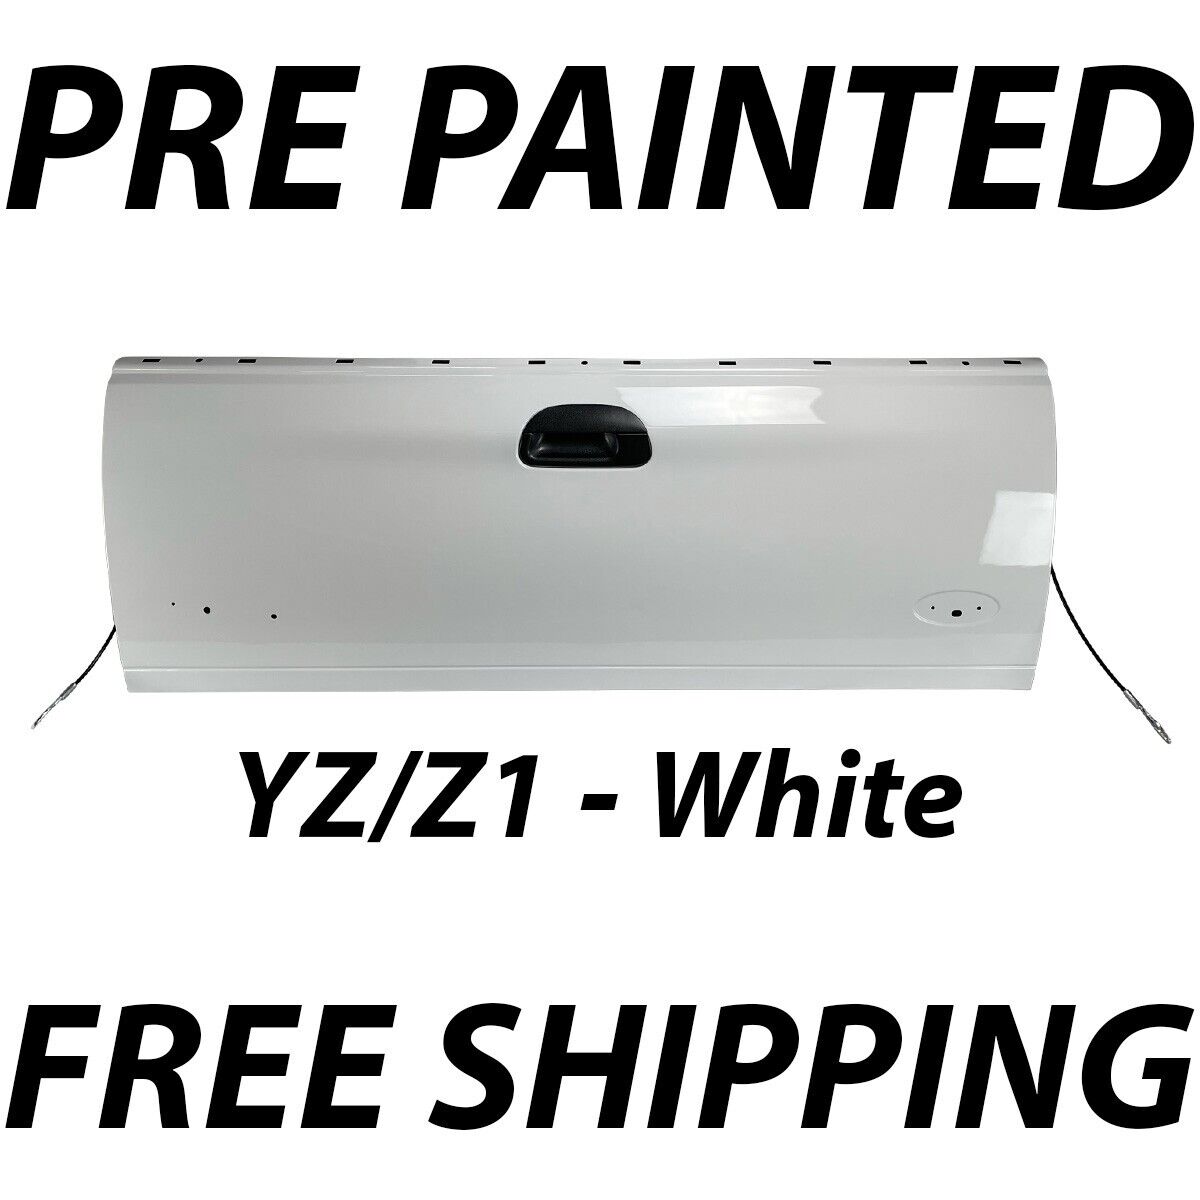 NEW Painted YZ/Z1 White - Rear Tailgate Assembly for Ford F250 F350 Super Duty